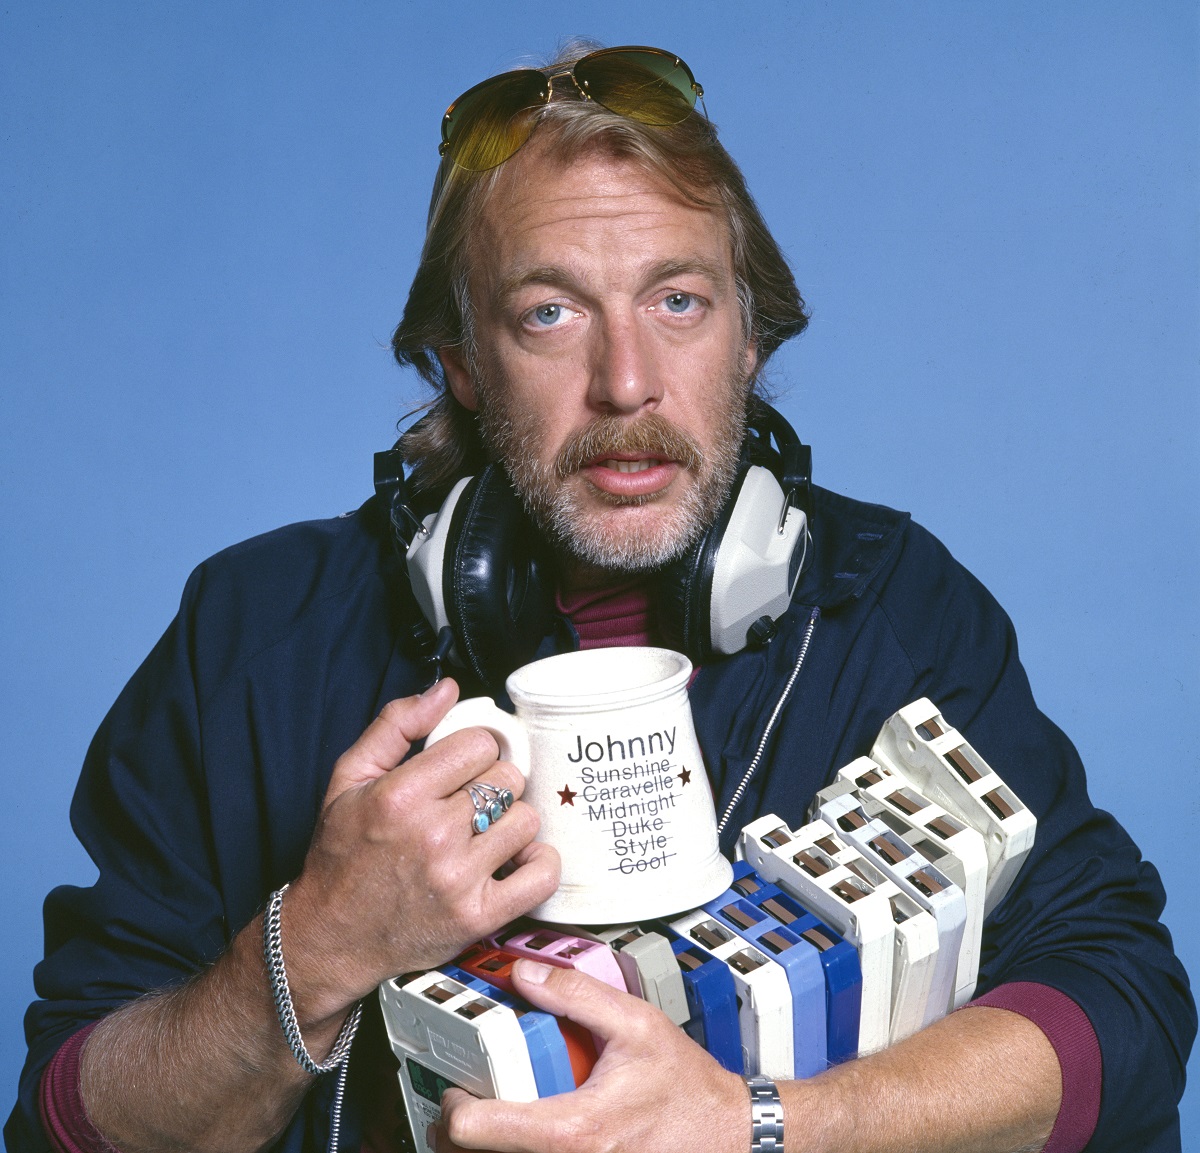 'WKRP in Cincinnati' star Howard Hesseman wearing sunglasses and headphones, and carrying tapes and a coffee mug.